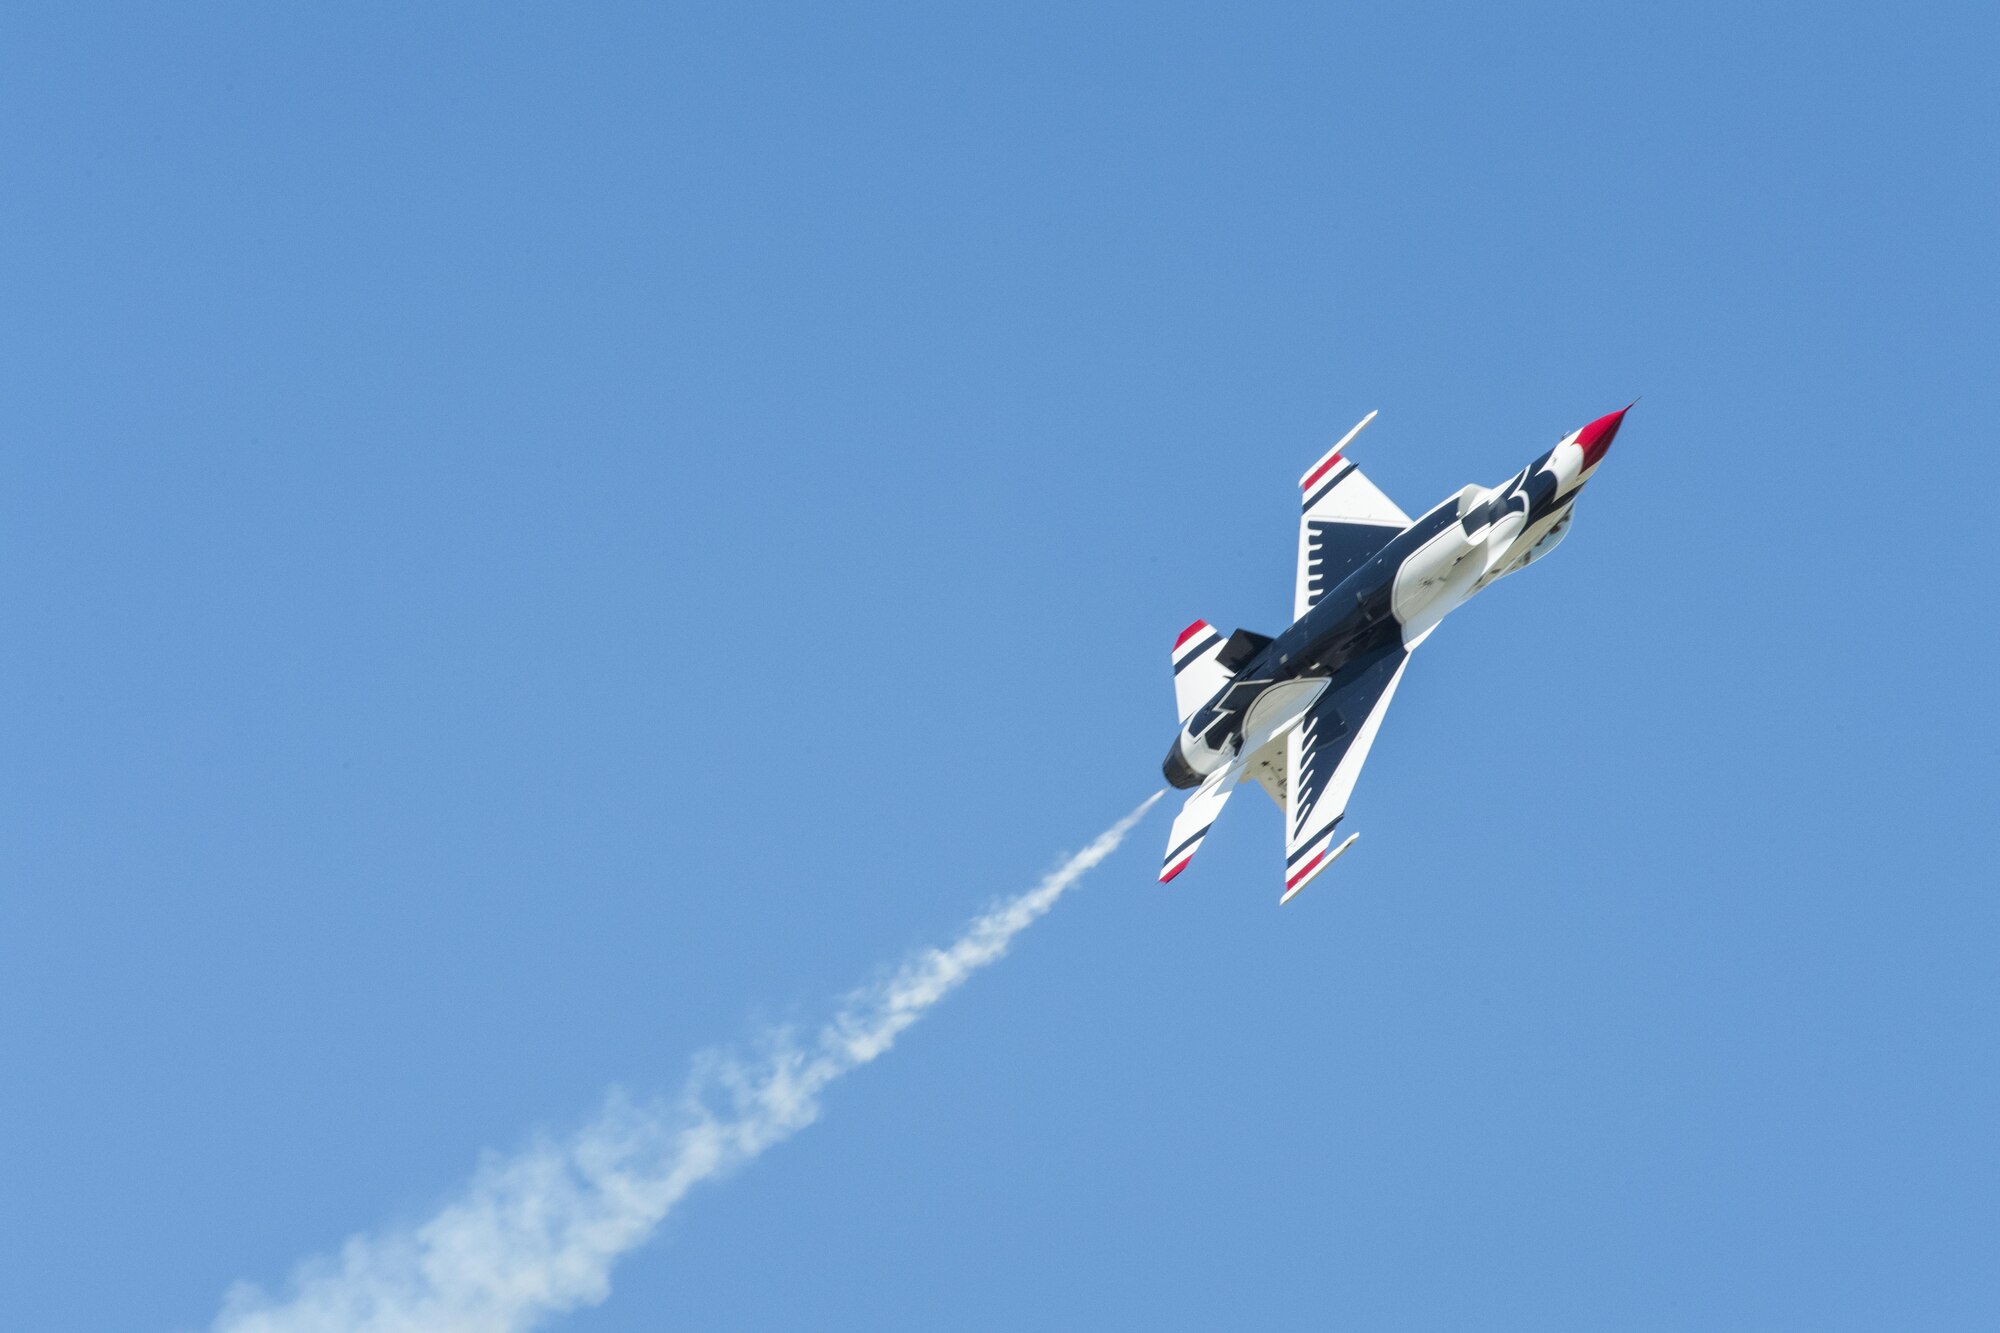 The U.S. Air Force Thunderbirds Flight Demonstration Team soars above Moody Air Force Base during the Thunder Over South Georgia Air Show, Oct. 29, 2017. The Thunderbirds, based out of Nellis Air Force Base, Nev., are the Air Force’s premier aerial demonstration team, performing at air shows and special events worldwide. (U.S. Air Force photo by Senior Airman Janiqua P. Robinson)